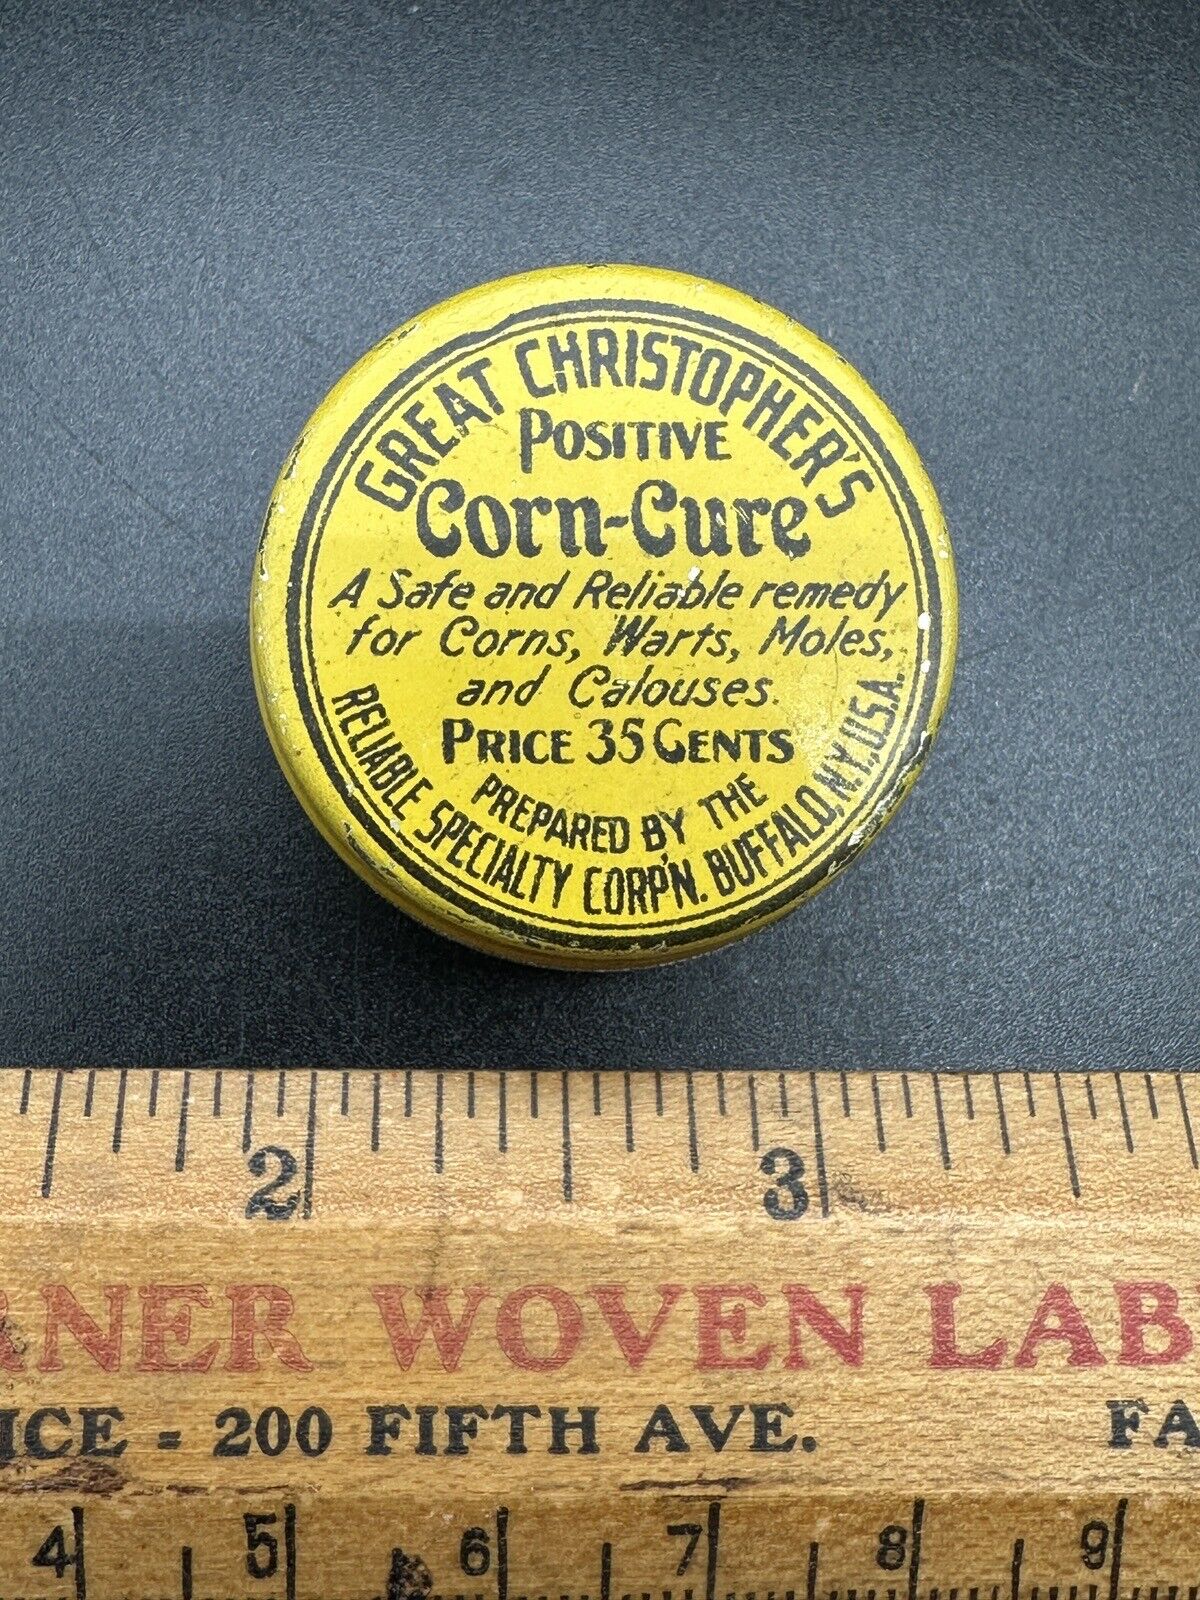 Great Christopher\'s Postive Corn Cure Tin Vintage Medical Advertising